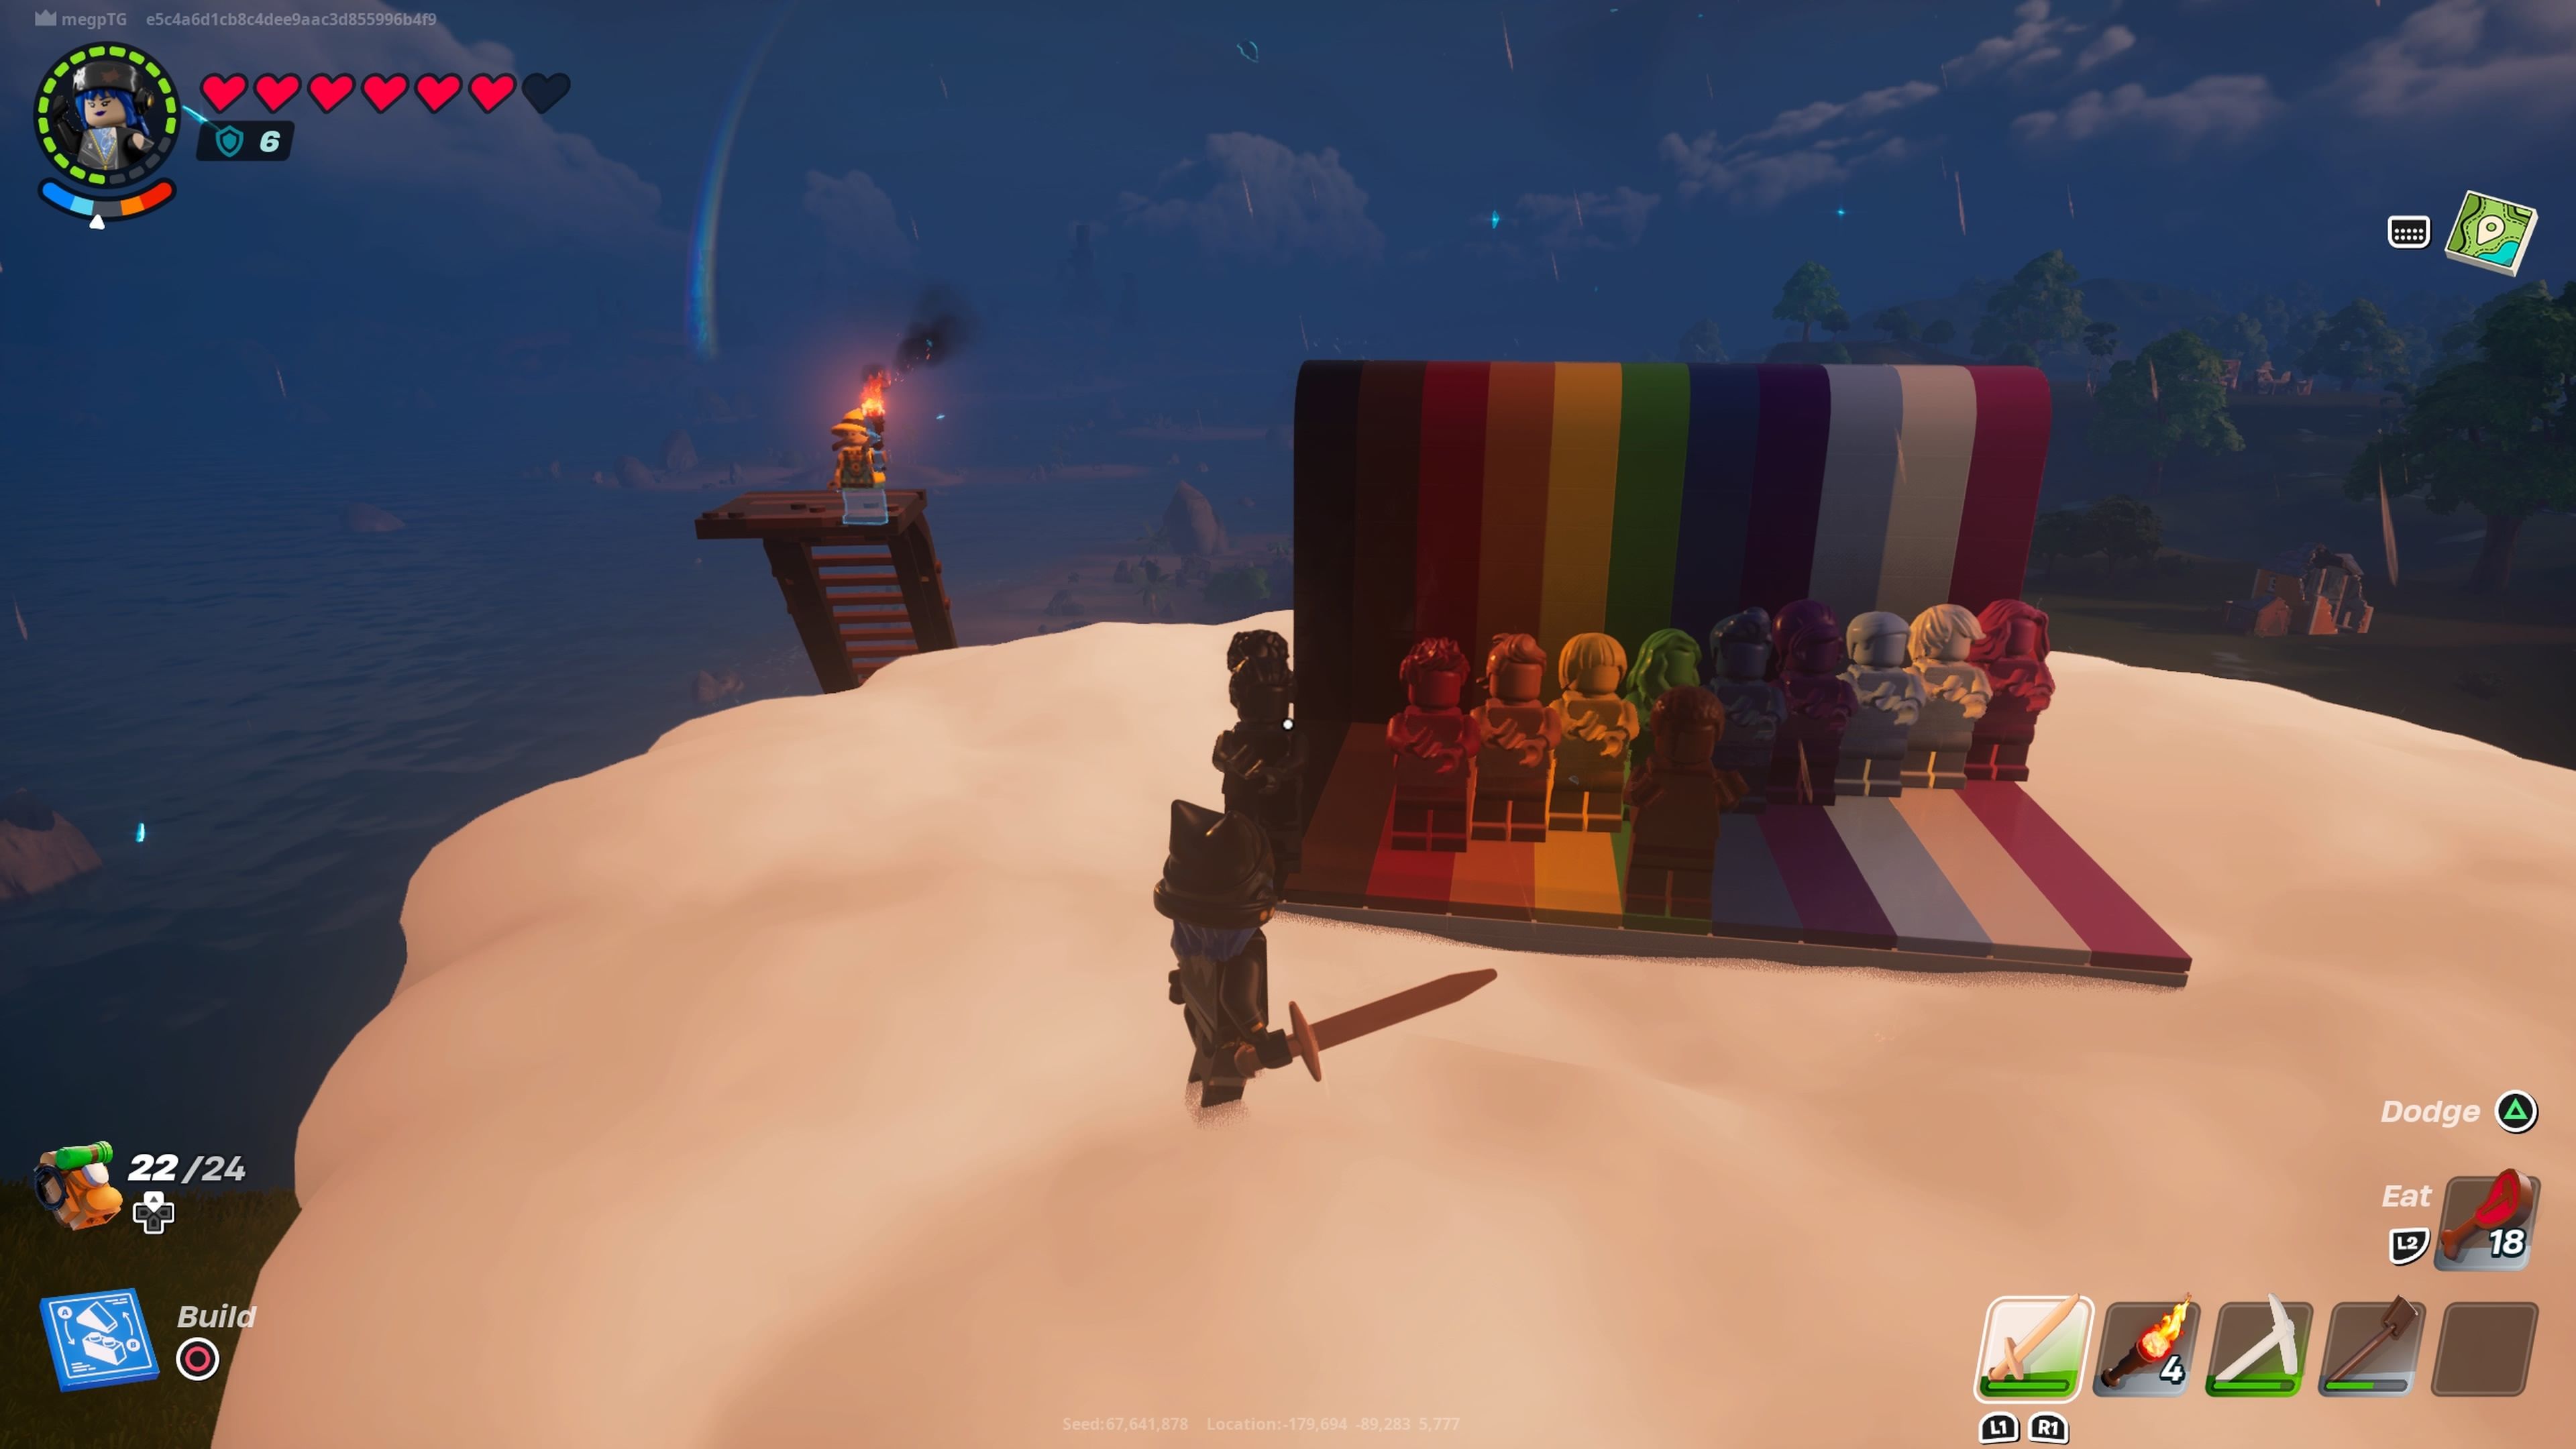 A player beside the rainbow coloured lego figures dancing at the end of the rainbow in Lego Fortnite.